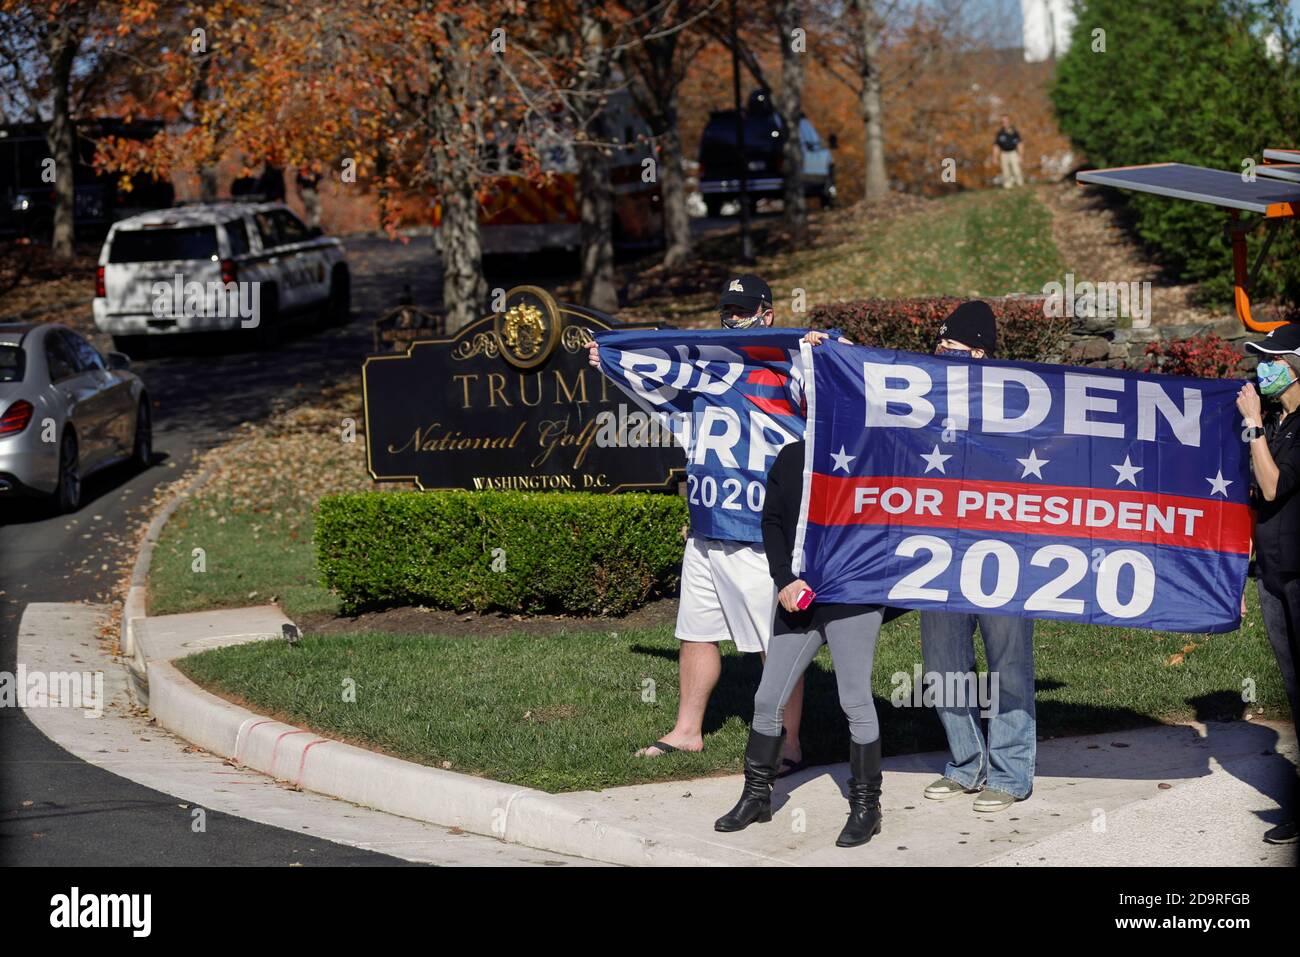 U.S. President Donald Trump arrives in a motorcade at Trump National Golf Club, as supporters of Democratic presidential nominee Joe Biden react as votes continue to be counted following the 2020 U.S. presidential election in Sterling, Virginia, U.S., November 7, 2020.  REUTERS/Carlos Barria Stock Photo